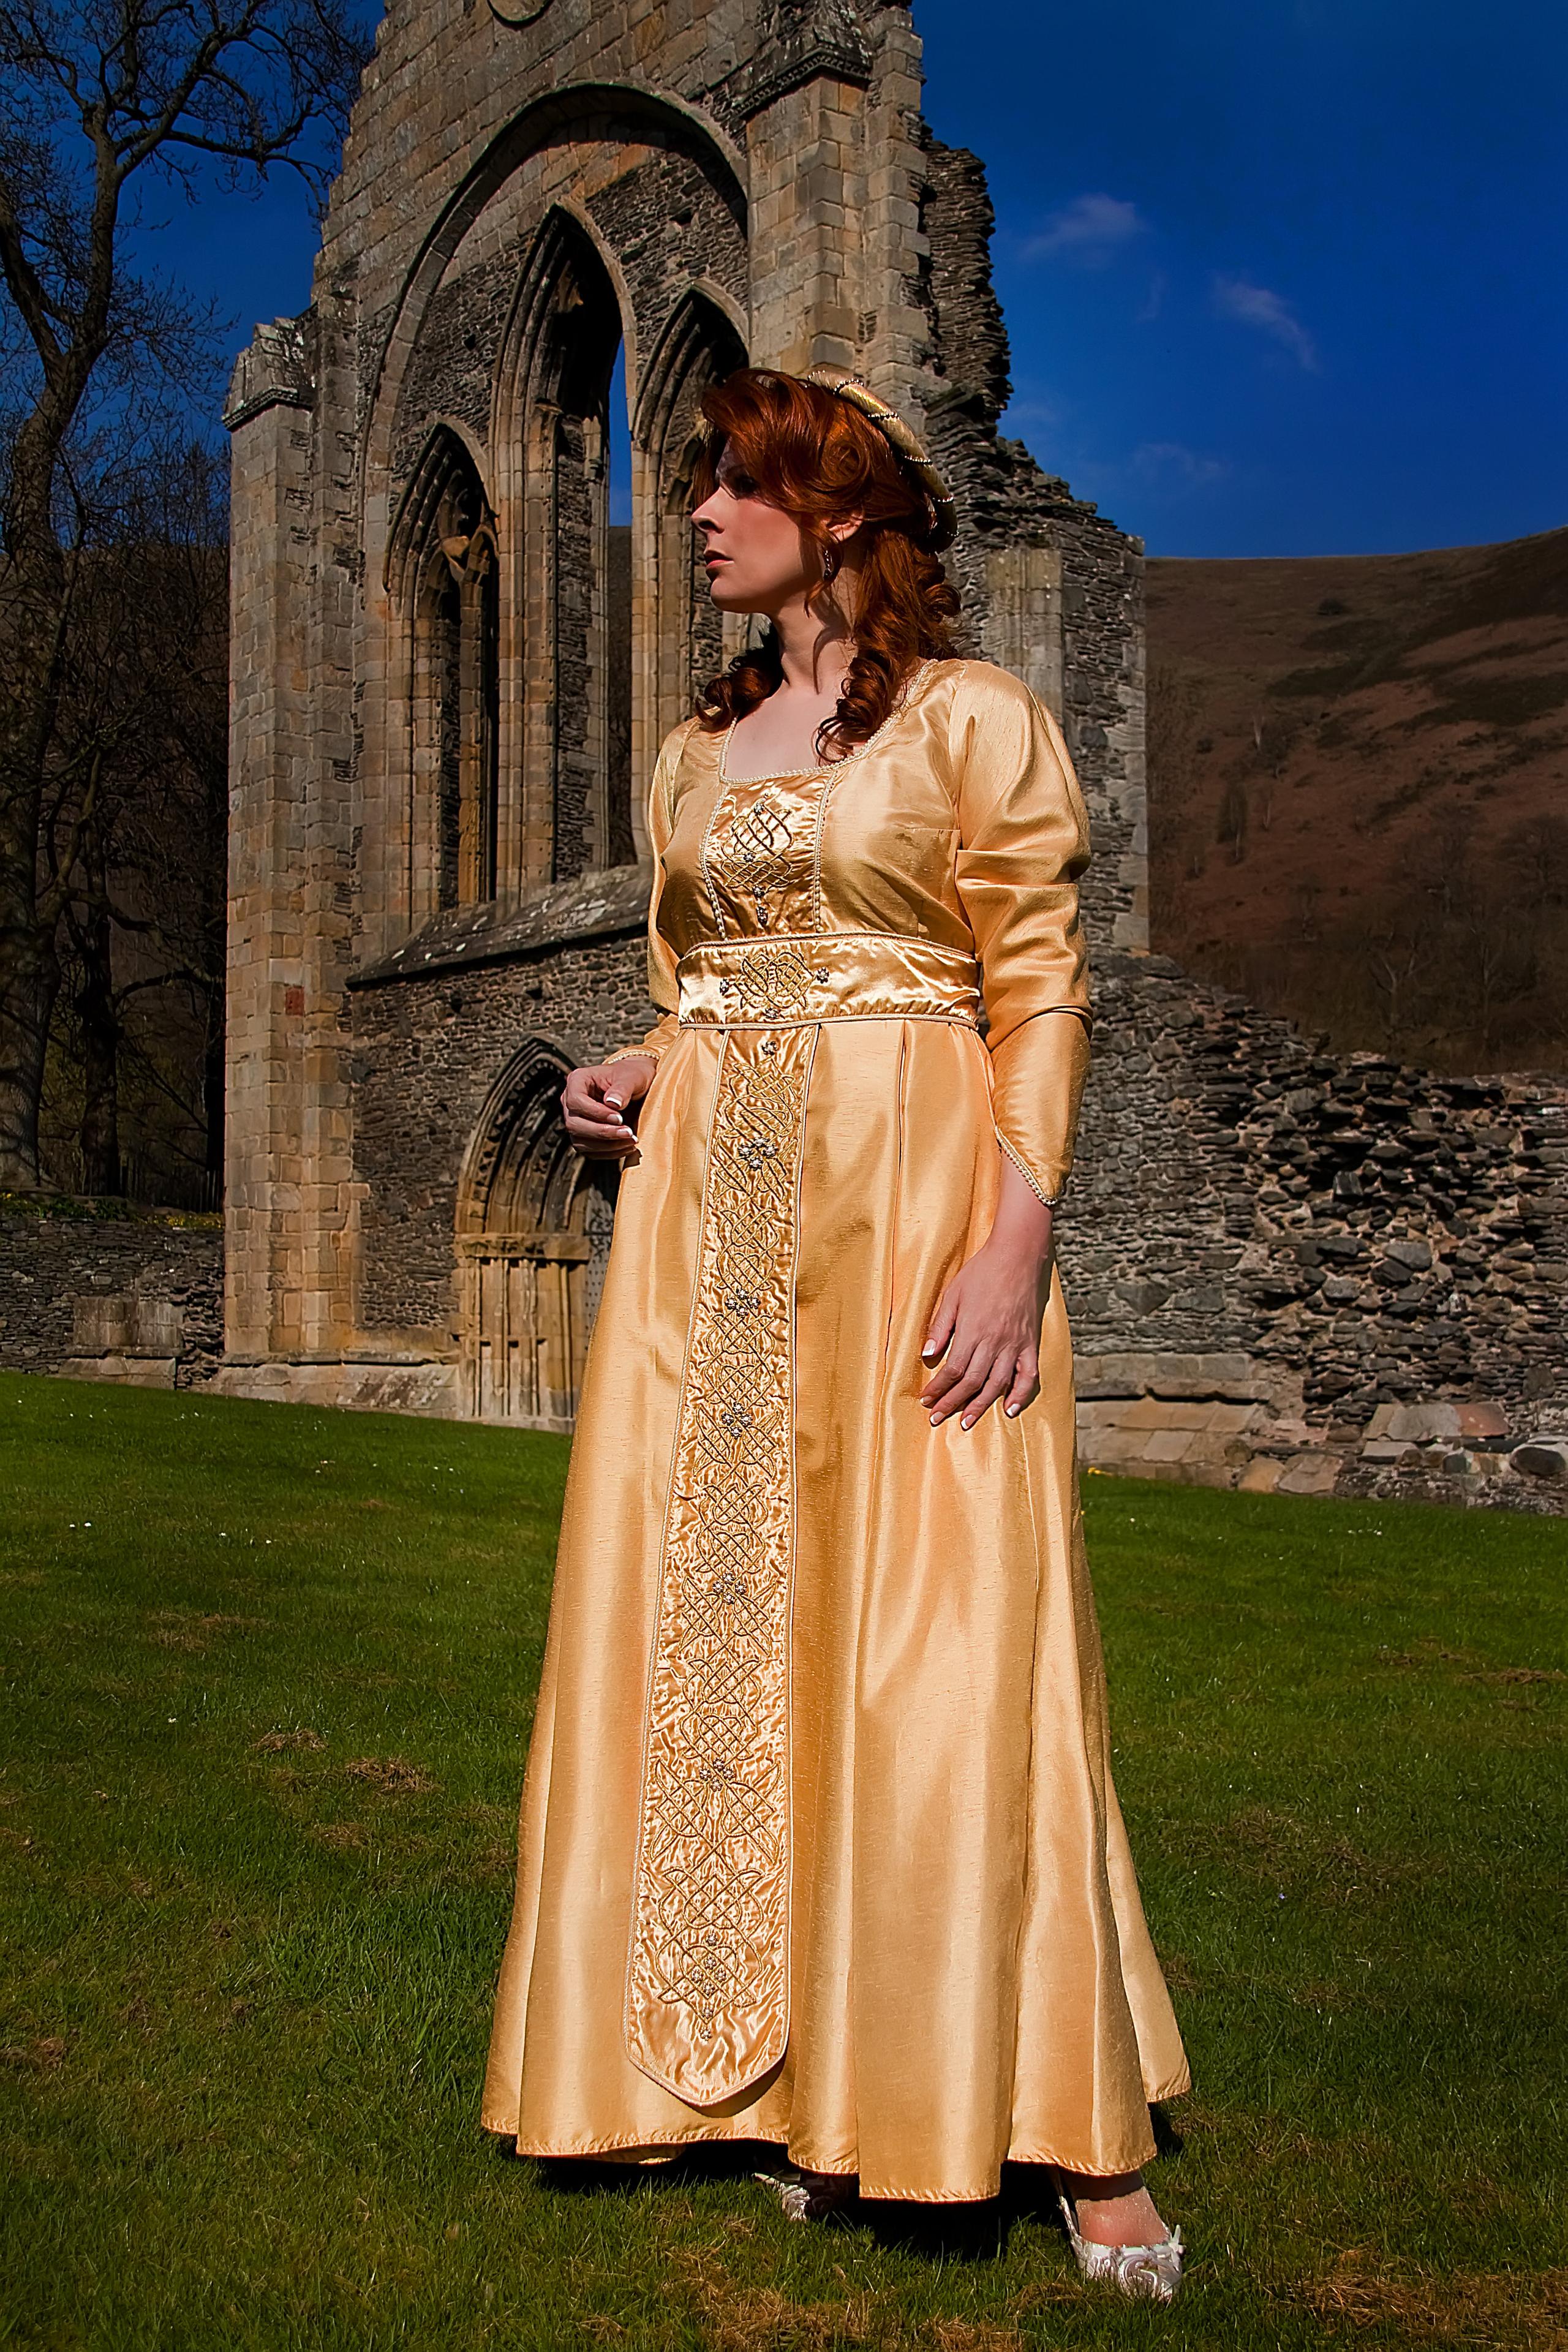 Gold empire line medieval gown with beadwork and celtic knotwork